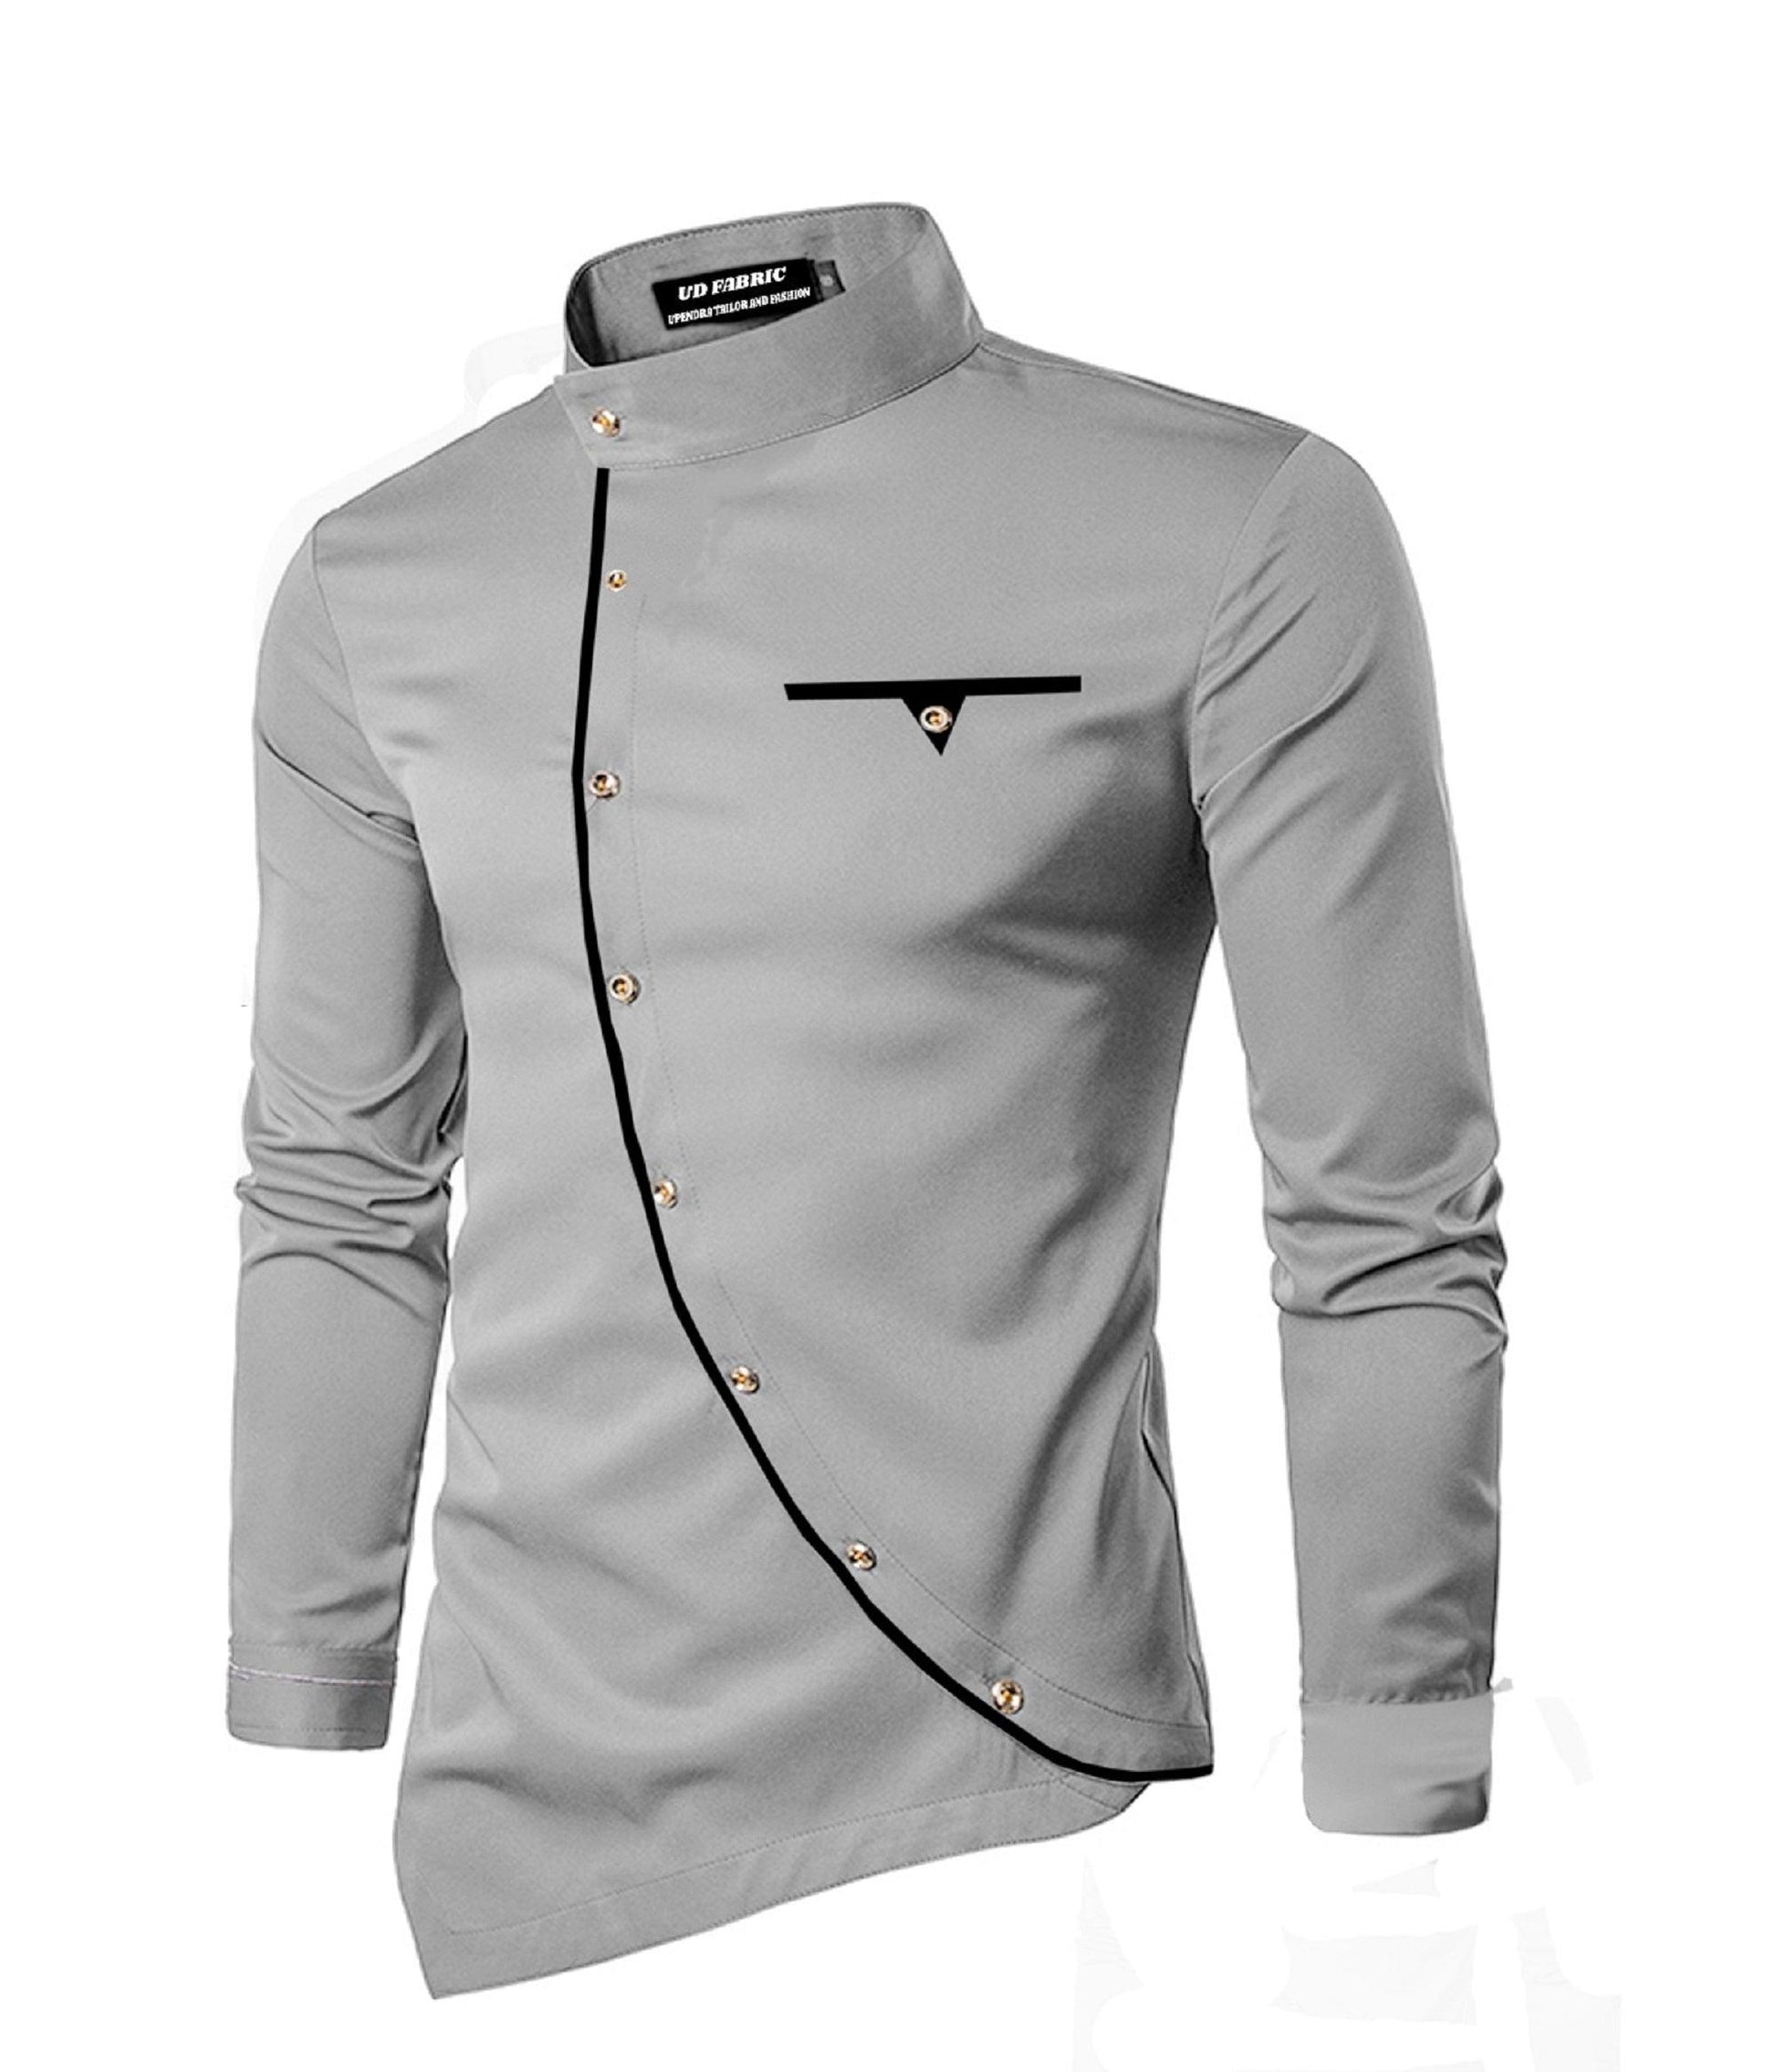 UDFABRIC Men’s Cotton Curve Full Sleeve Slim Fit Kurta -Grey - UD FABRIC - Your Style our Design